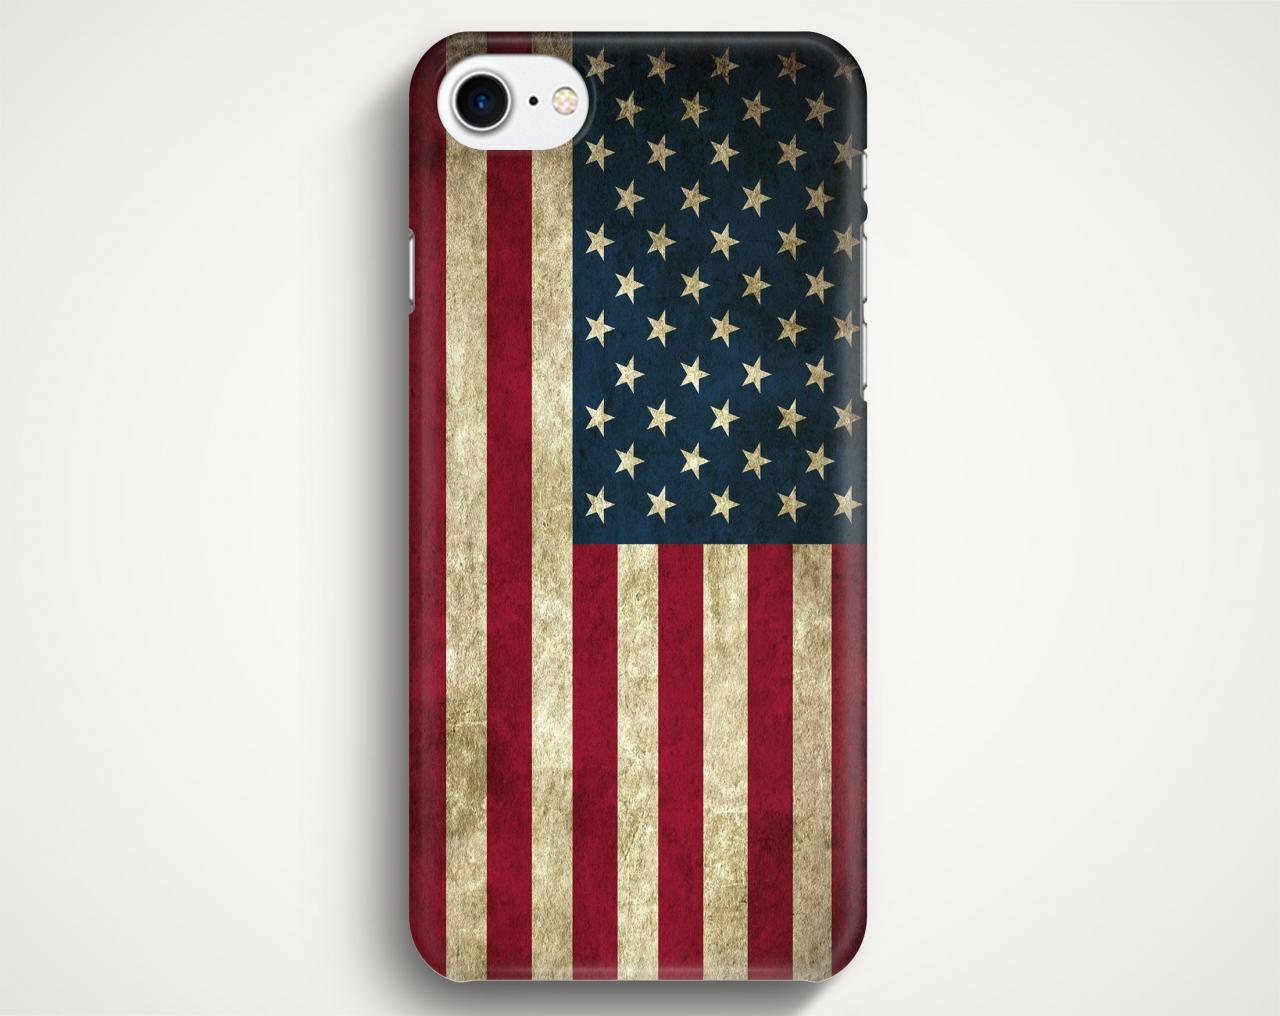 Flag Of Usa Case For Iphone 7 Iphone 7 Plus Samsung Galaxy S8 Galaxy S7 Galaxy A3 Galaxy A5 Galaxy A7 Lg G6 Lg G5 Htc 10